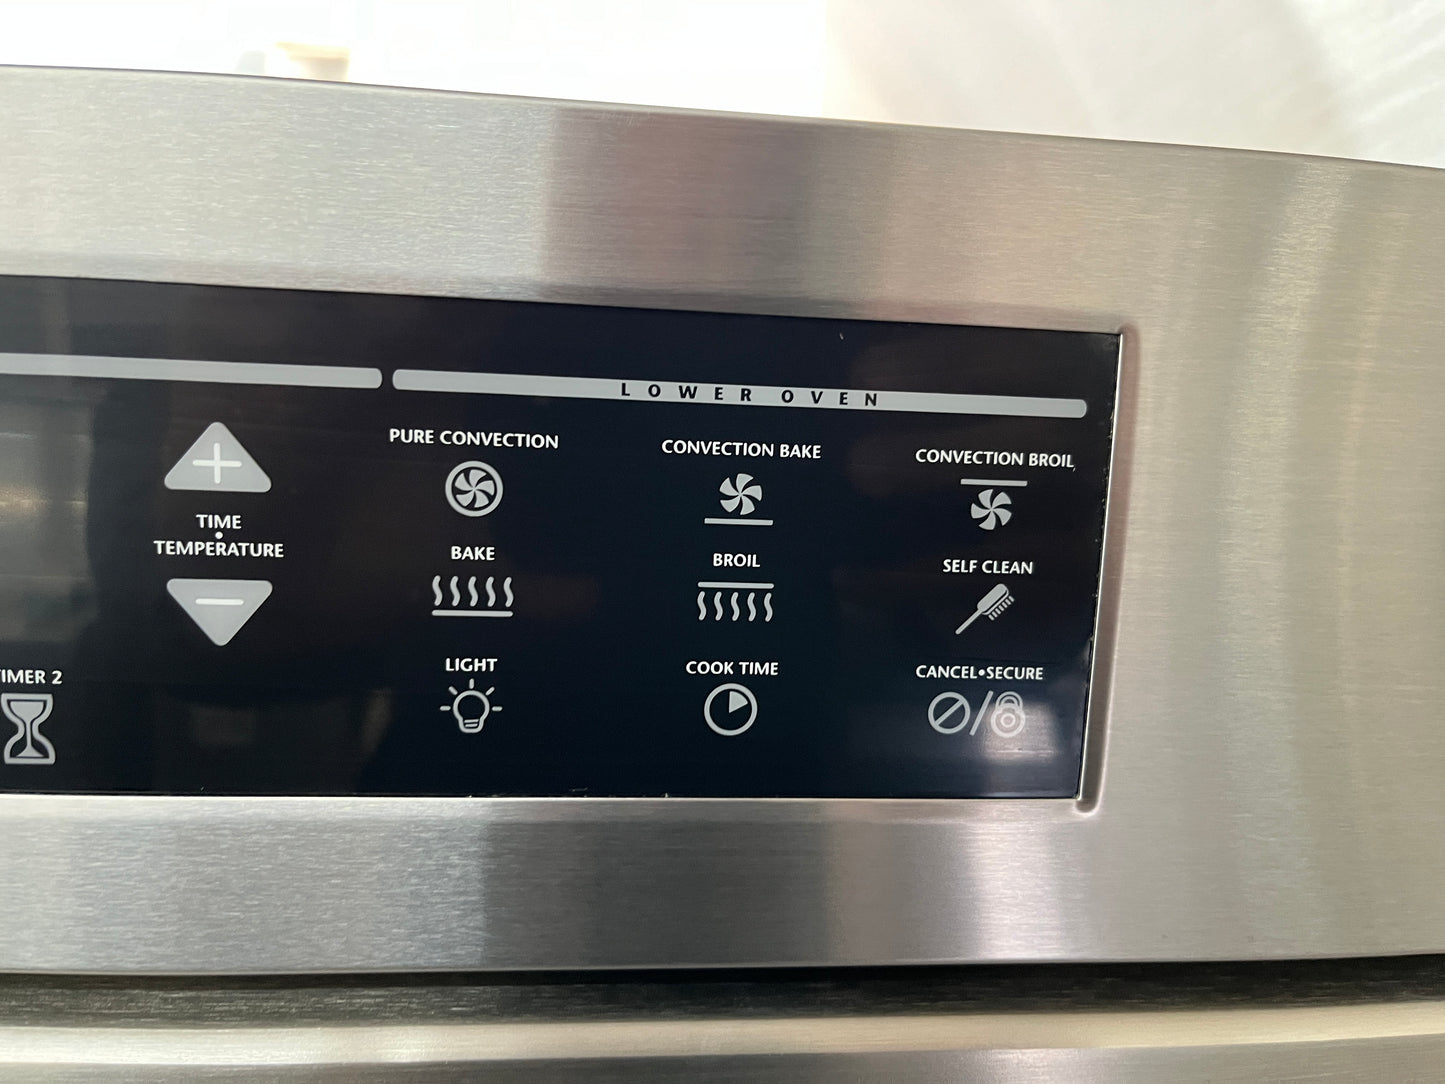 Dacor Millennia  MCD230S 30 Inch Double Electric Wall Oven 3.9 cu. ft. Self Cleaning Convection Ovens, Safety Lockout and Delay Timed Cooking: Stainless Steel , 369386